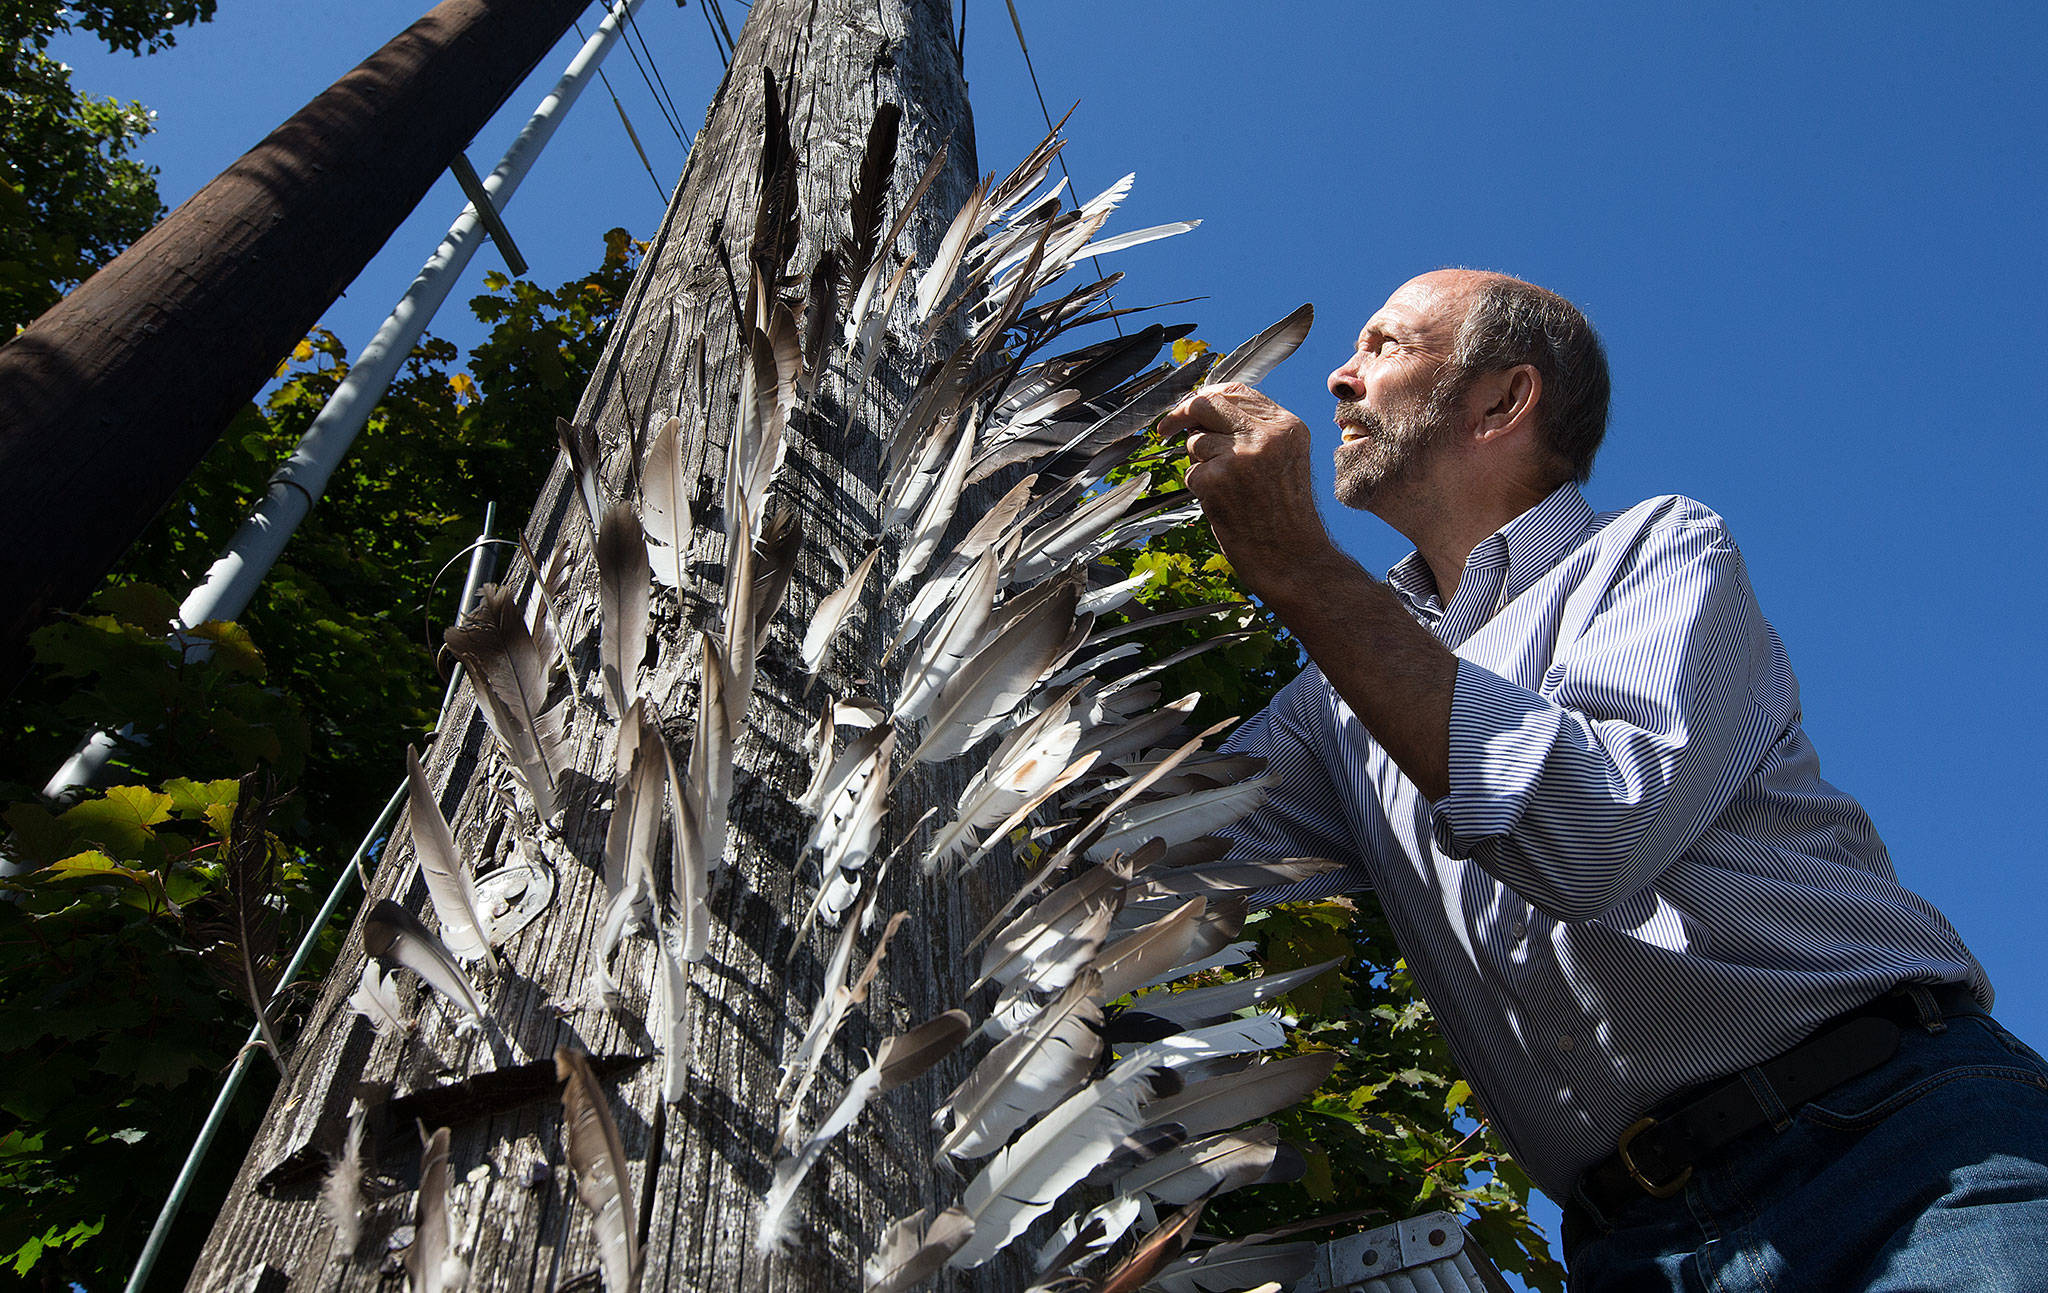 Jerry Gay has been putting feathers, found in his yard, into a unused power pole on Madison Street for the past two years. (Andy Bronson / The Herald)